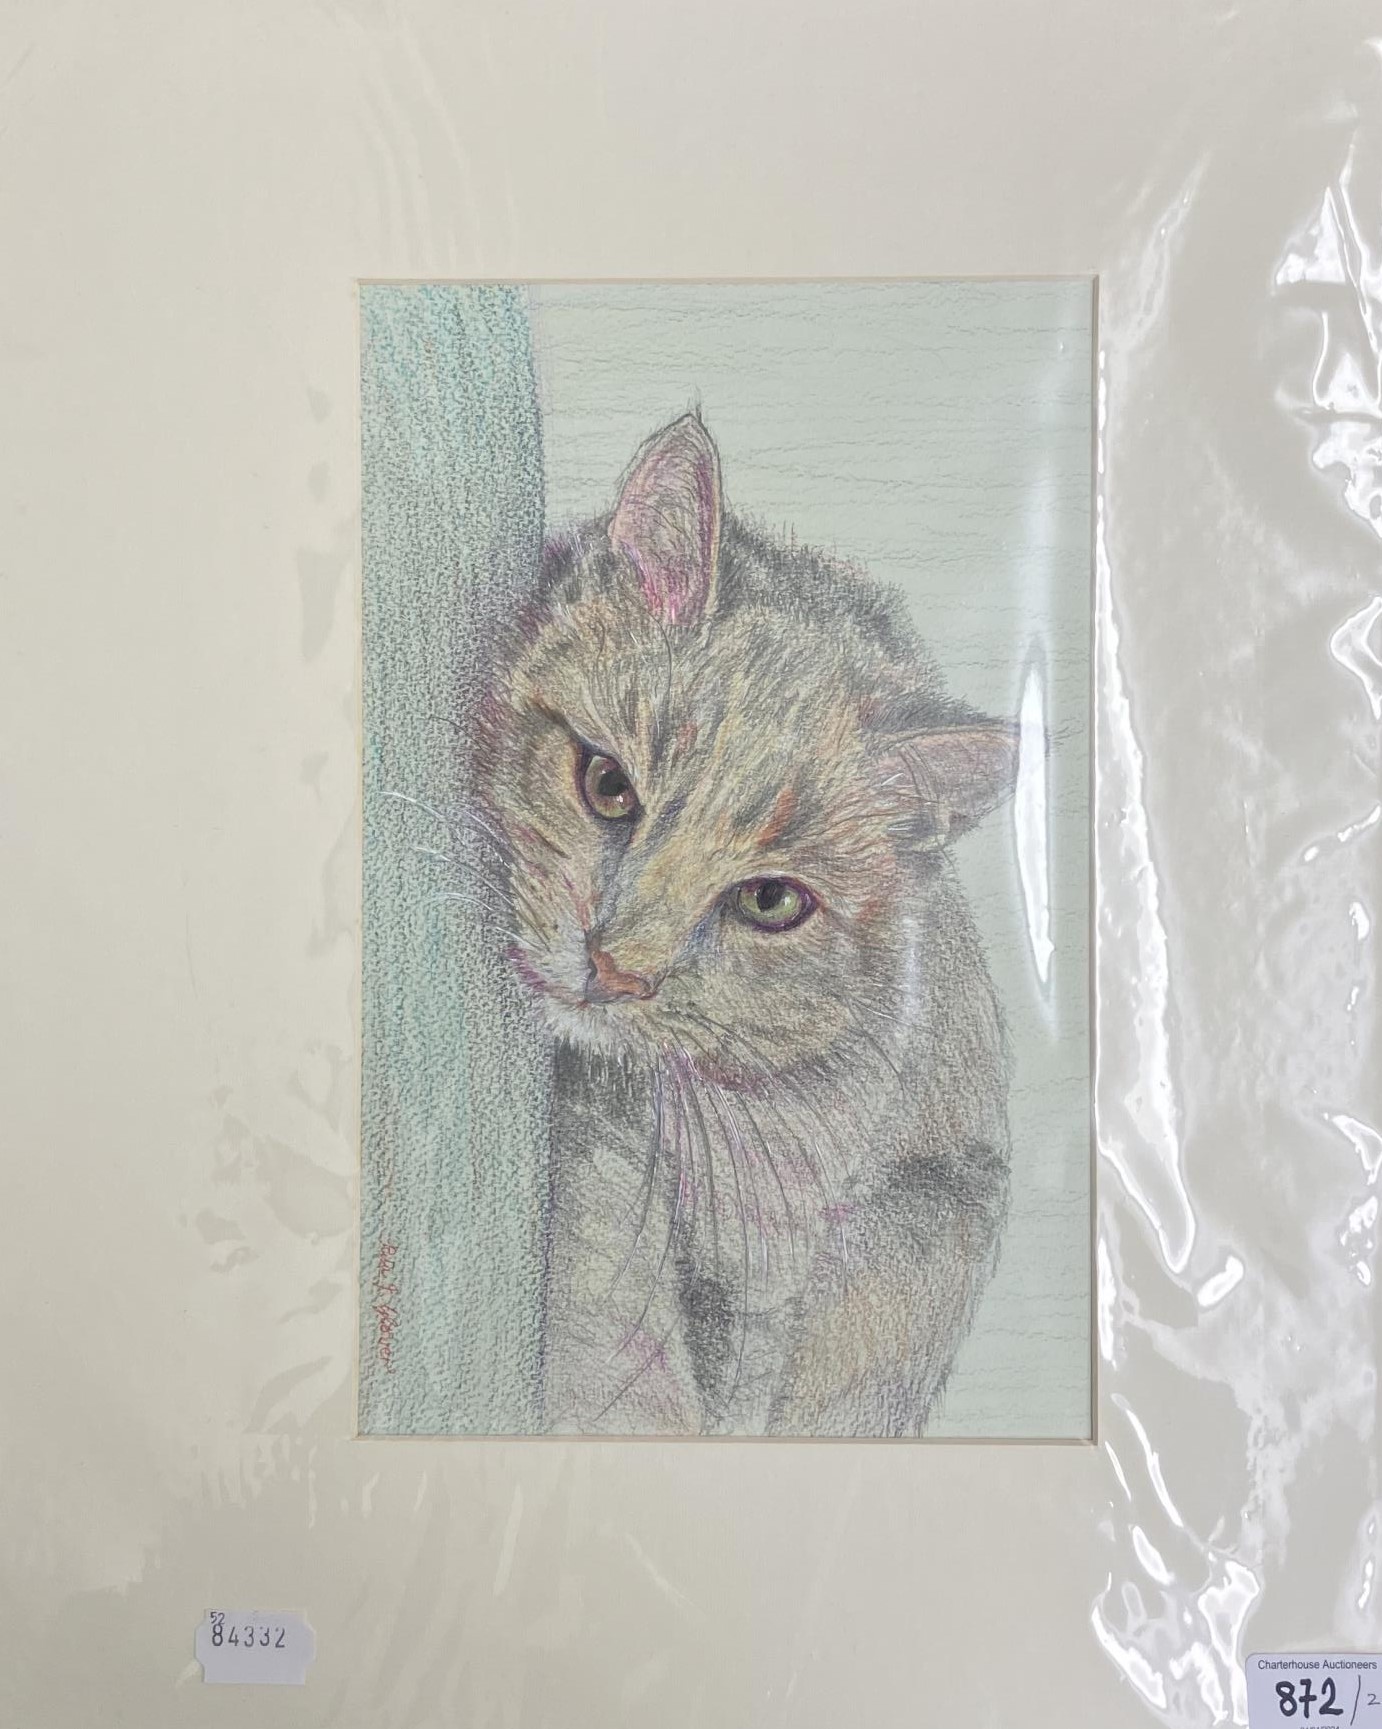 Rita Glover, a portrait of a cat, pastel, 19 x 30 cm, and another, unframed, Sabal, a woodland, - Image 2 of 10